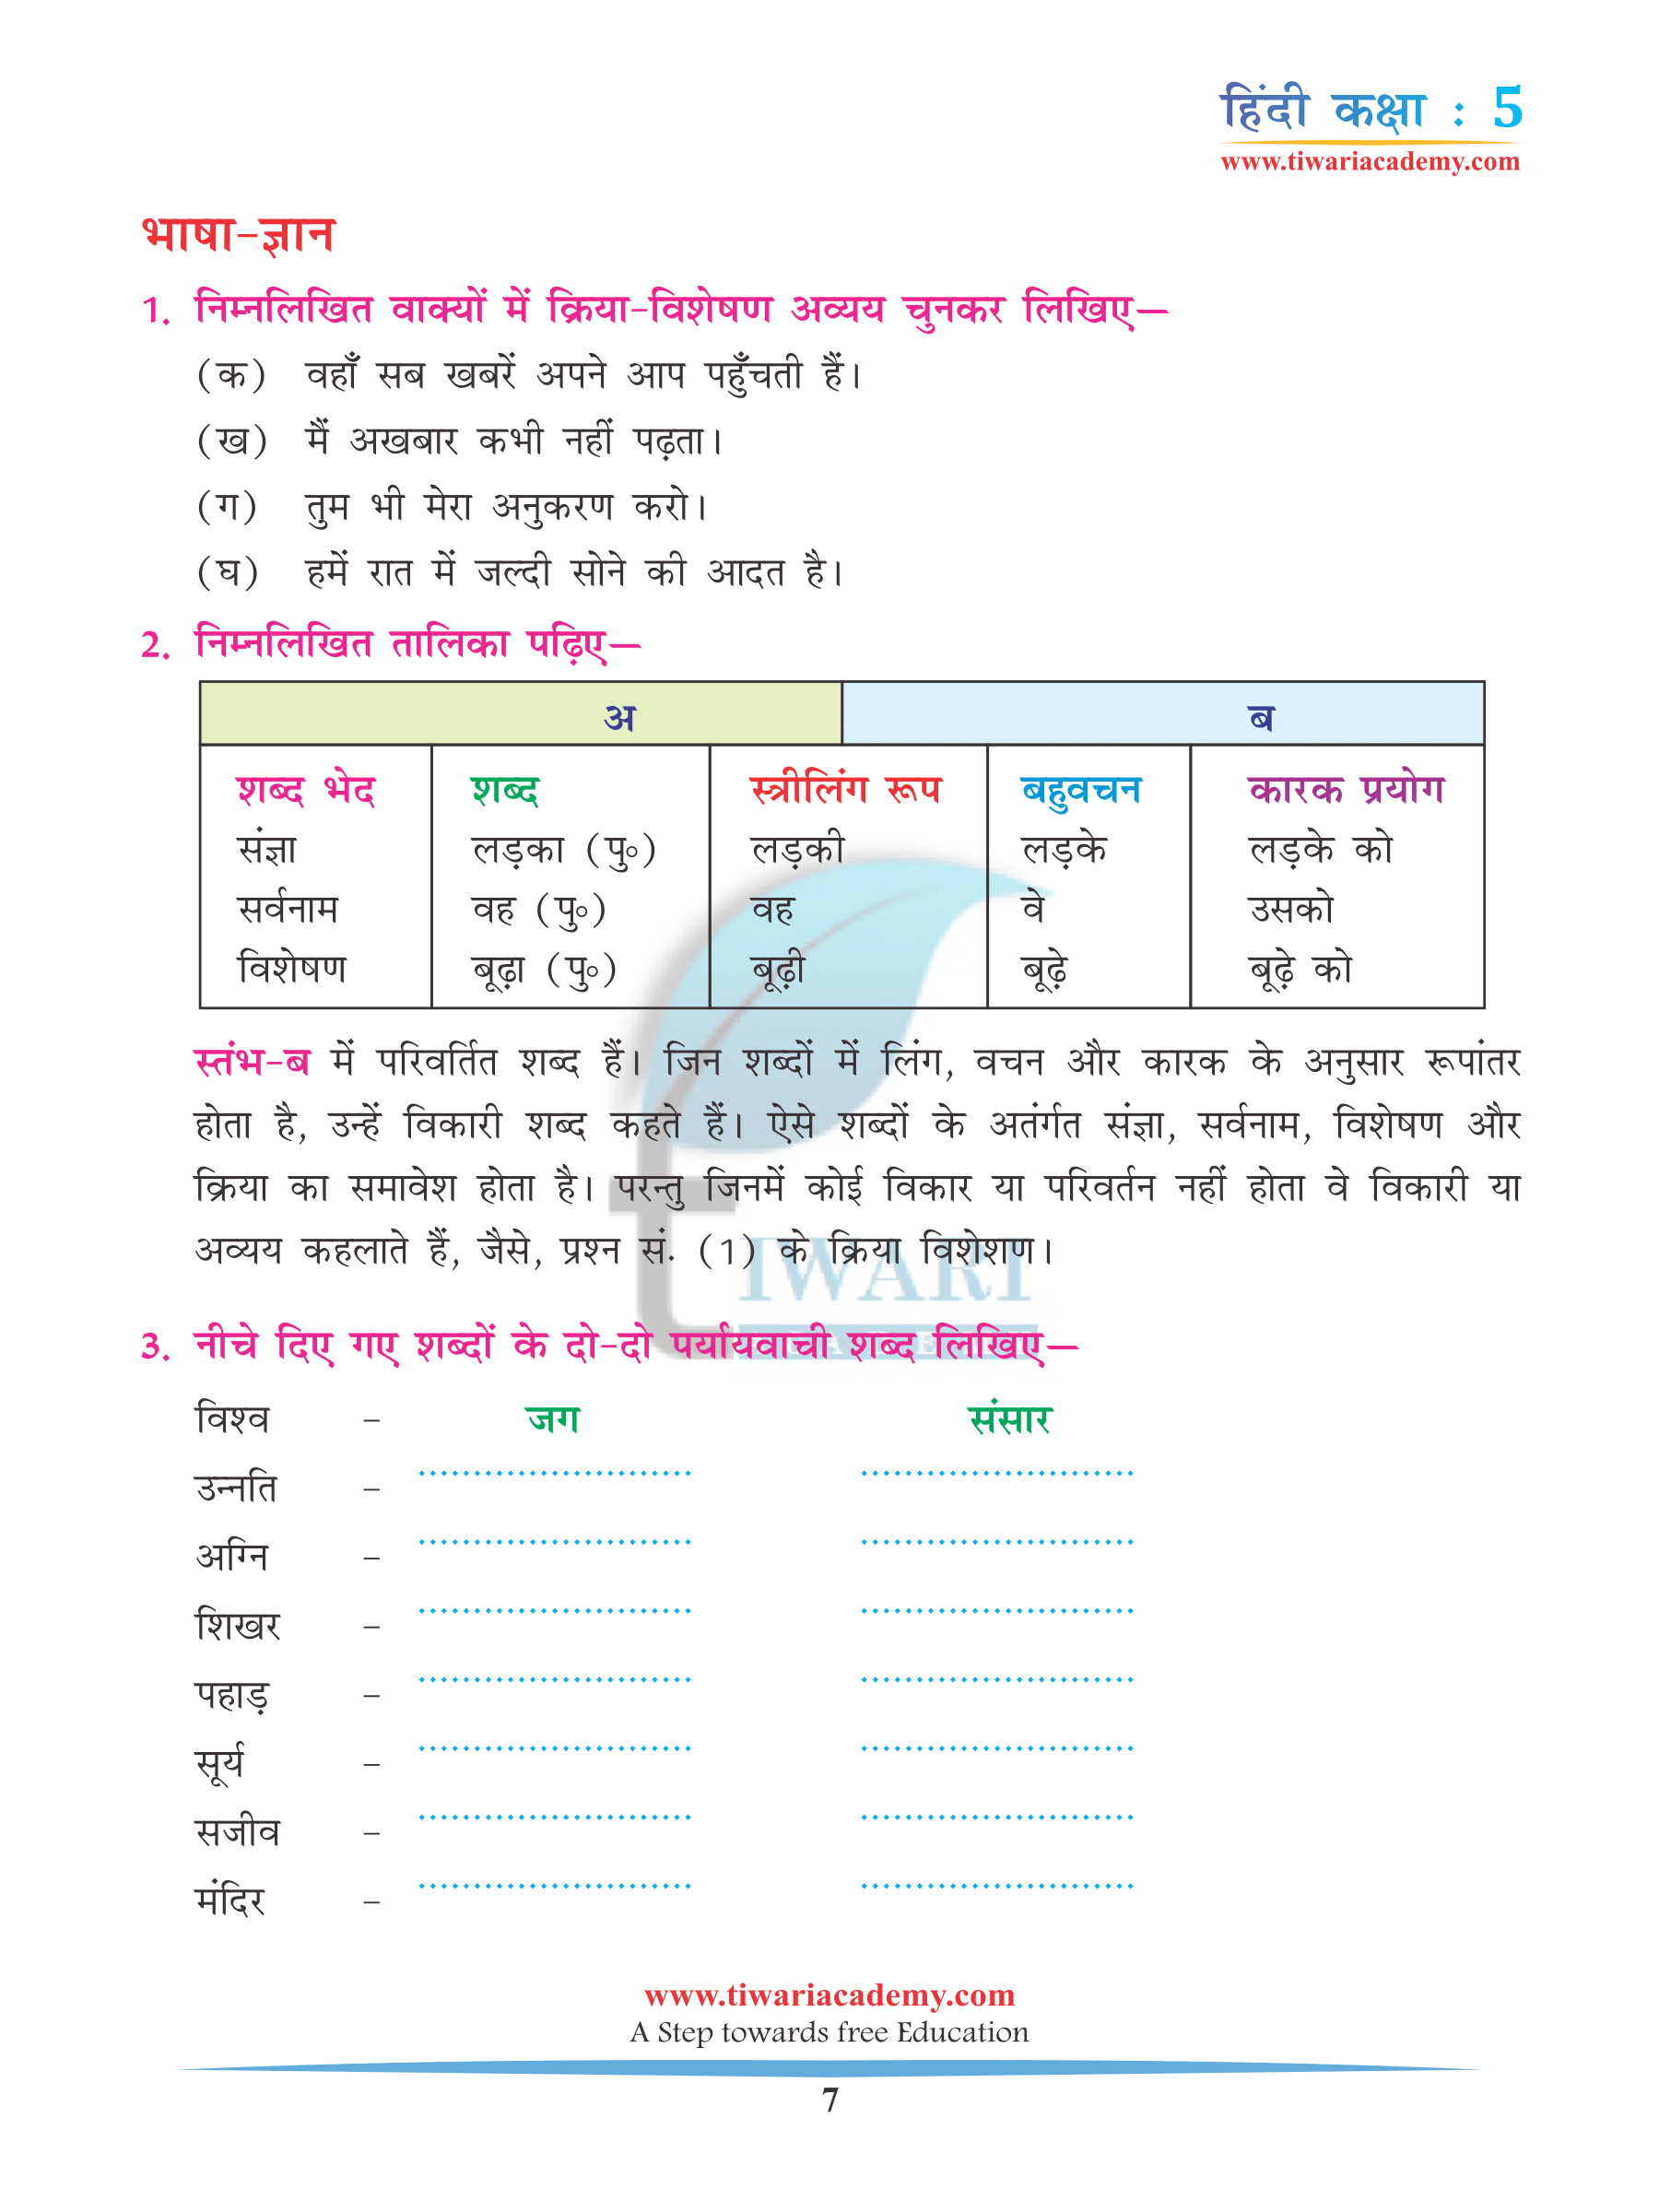 NCERT Solutions for Class 5 Hindi Chapter 4 Question Answers